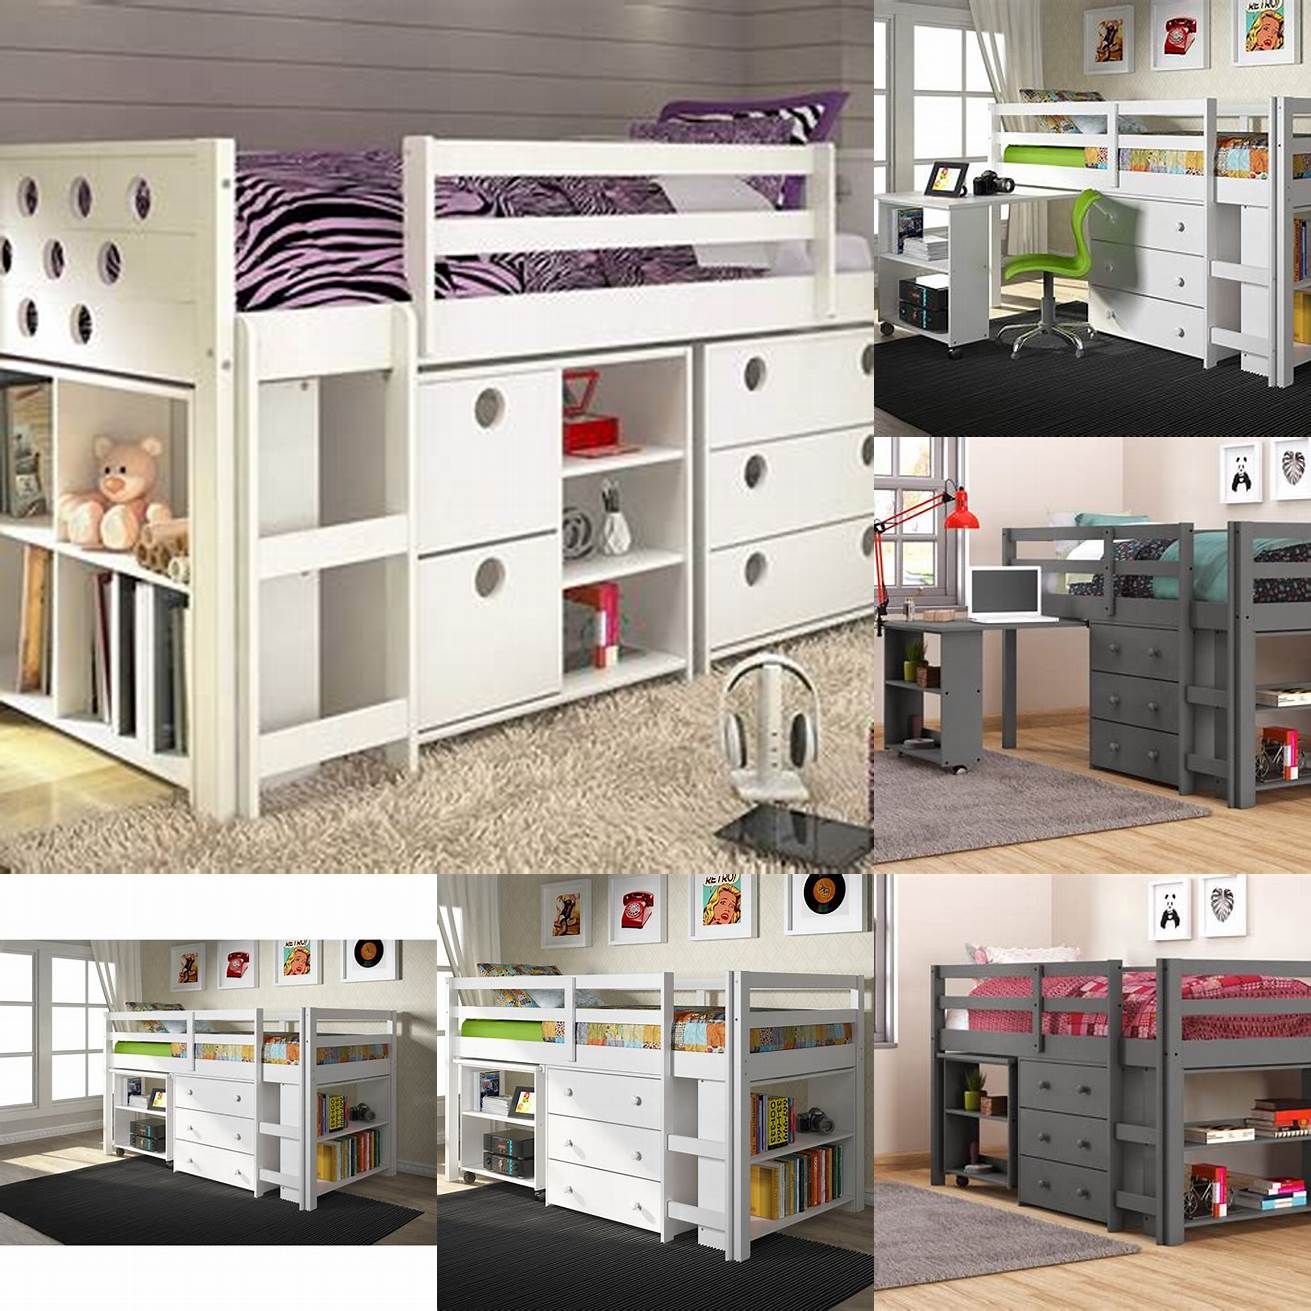 The Donco Kids Low Study Loft Bed is perfect for small spaces and comes with a built-in desk for homework and crafts